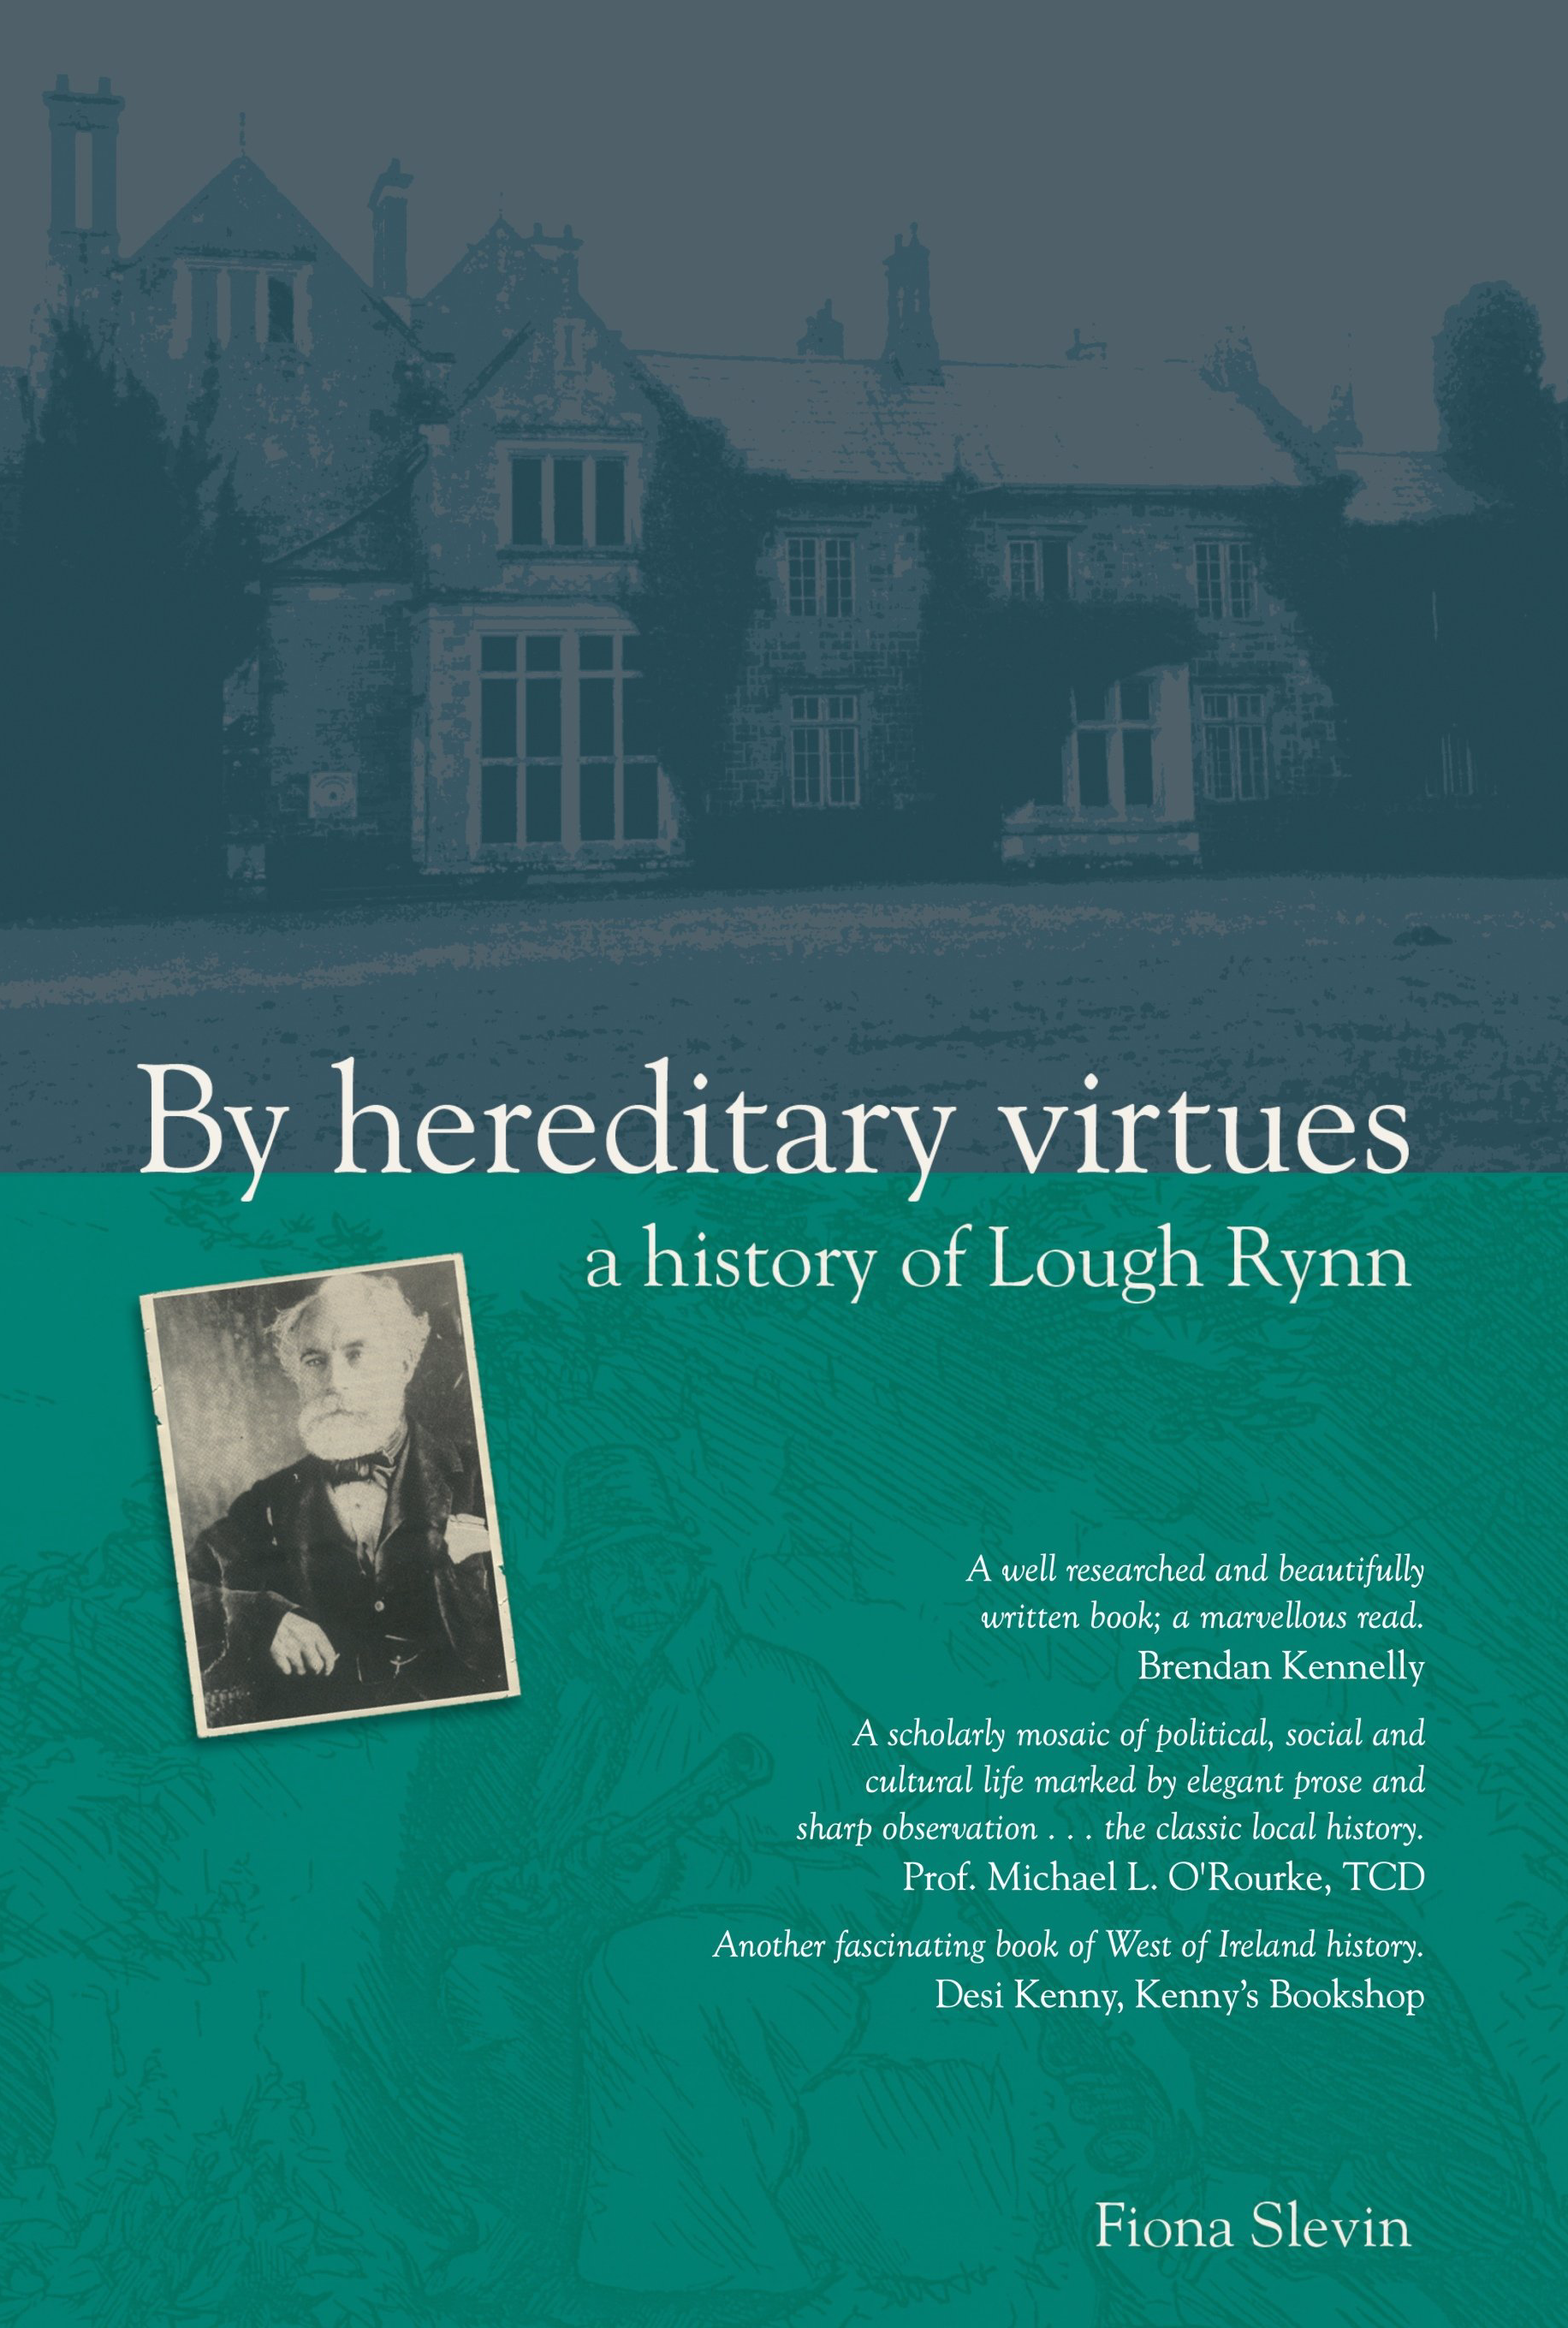 Front cover of By Hereditary Virtues: a history of Lough Rynn by Fiona Slevin